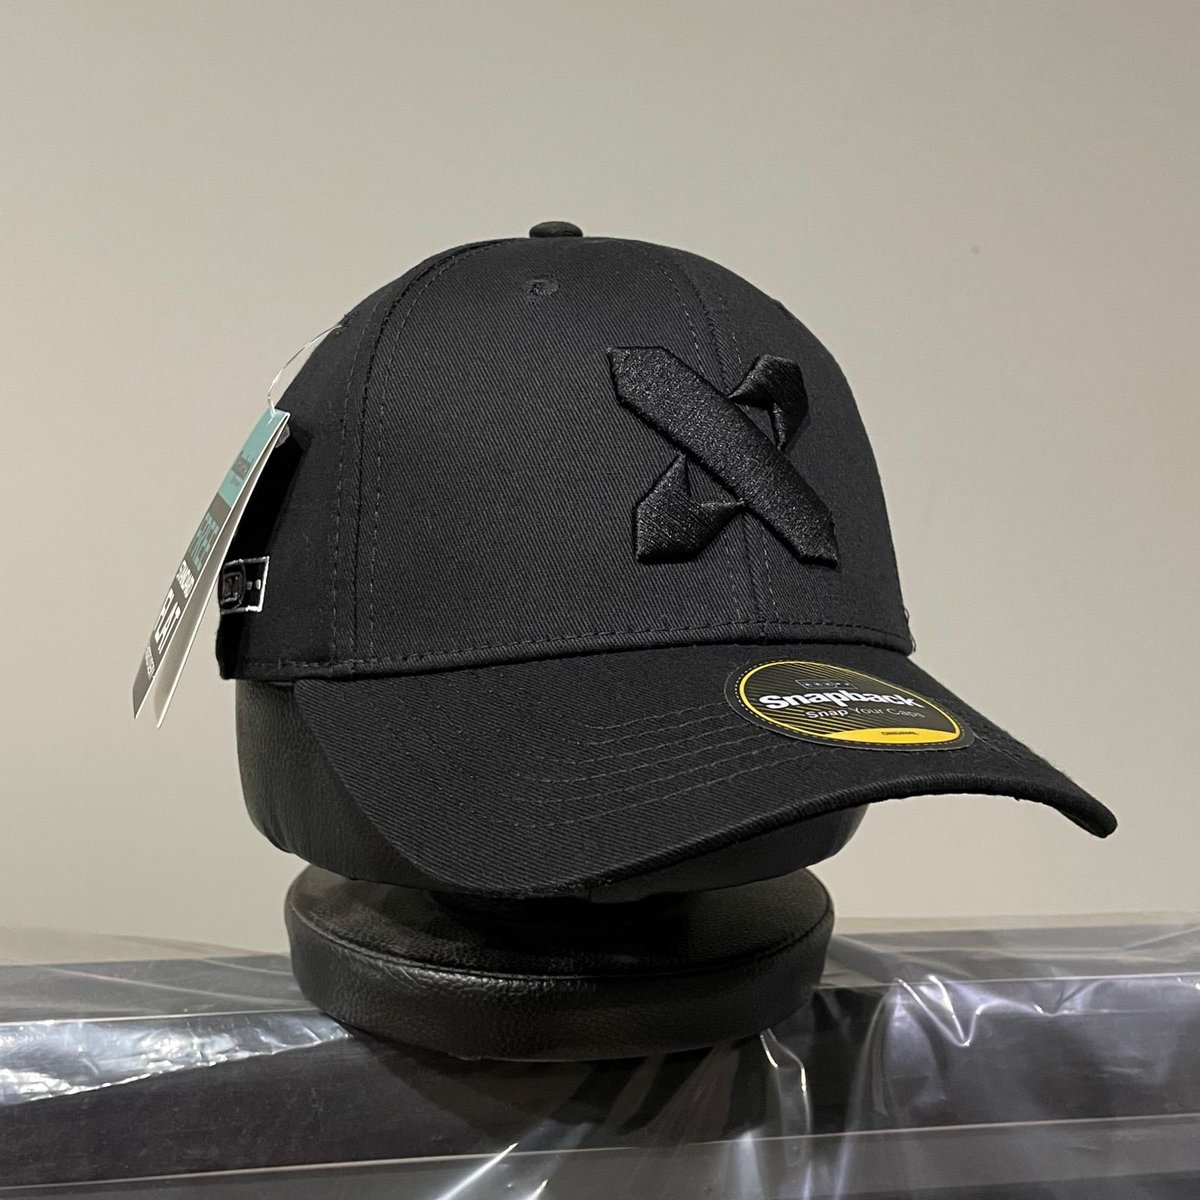 I’ve got a spare @supabase LWX cap sitting around! Going to raffle it off! To enter: ♻️ Like & repost my ticket below 🎫 Reply with your ticket Might even throw in some 🔨 stickers! Let’s goooo 🚀